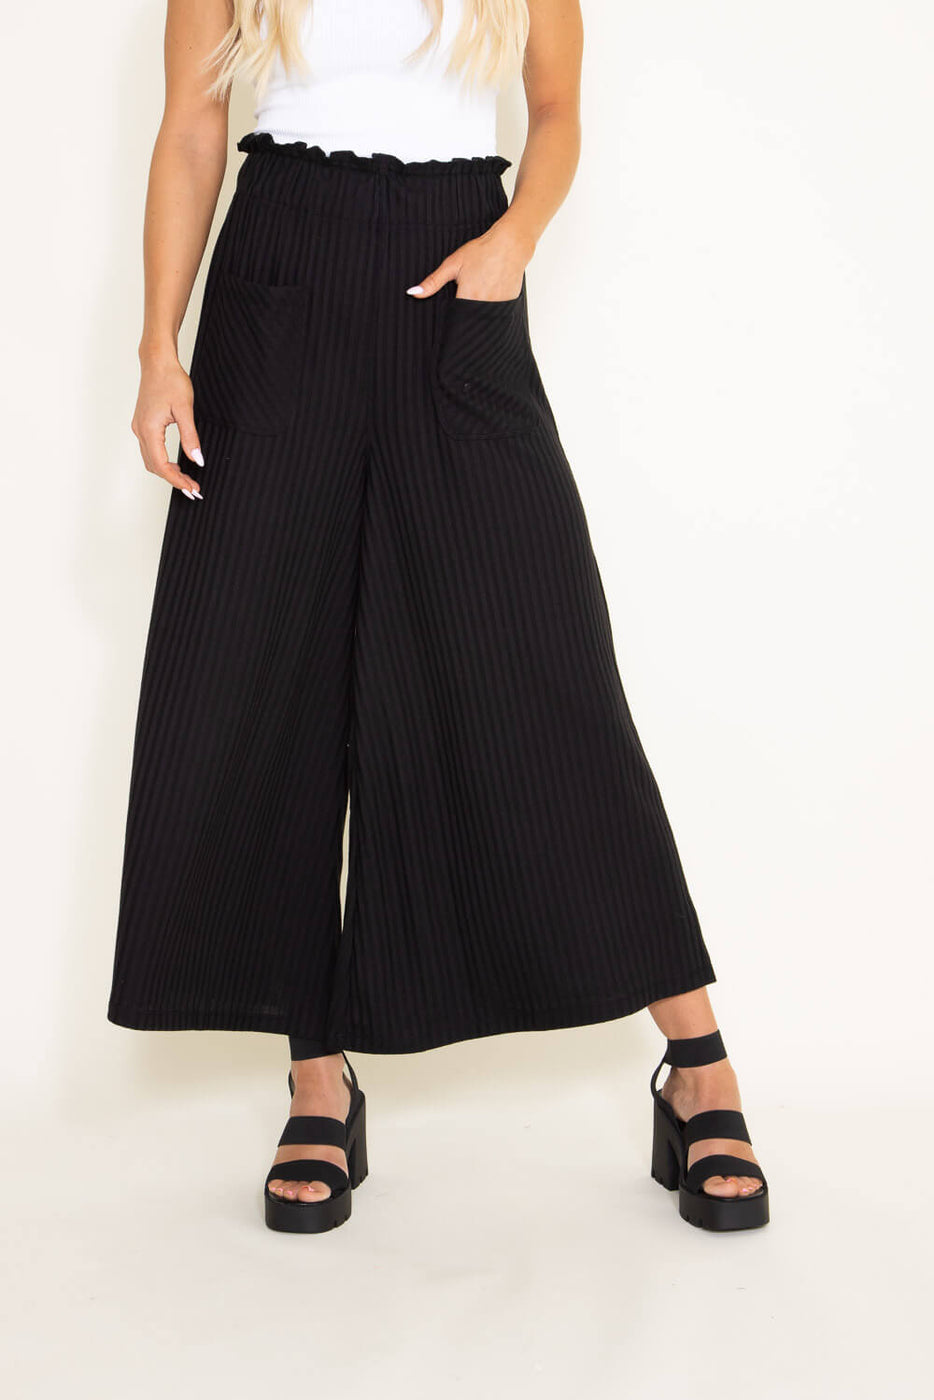 SobeiKre Palazzo Pants for Women Ruffle Drawstring High Waist Pleated Wide  Leg Trousers Casual Summer Beach Pants Fashion, Black, Small : :  Clothing, Shoes & Accessories